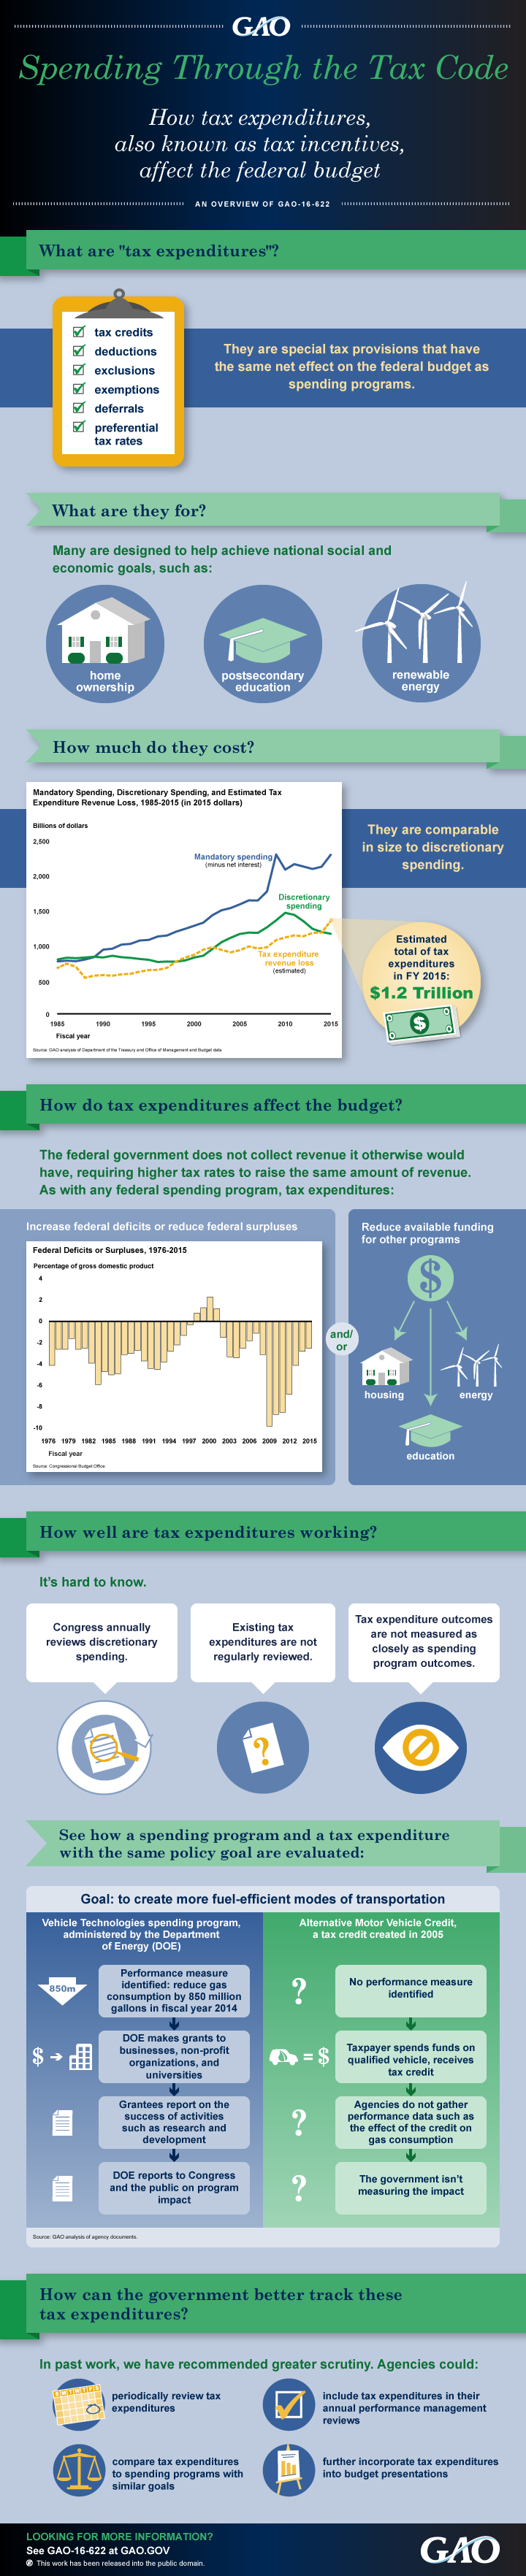 Spending Through the Tax Code infographic